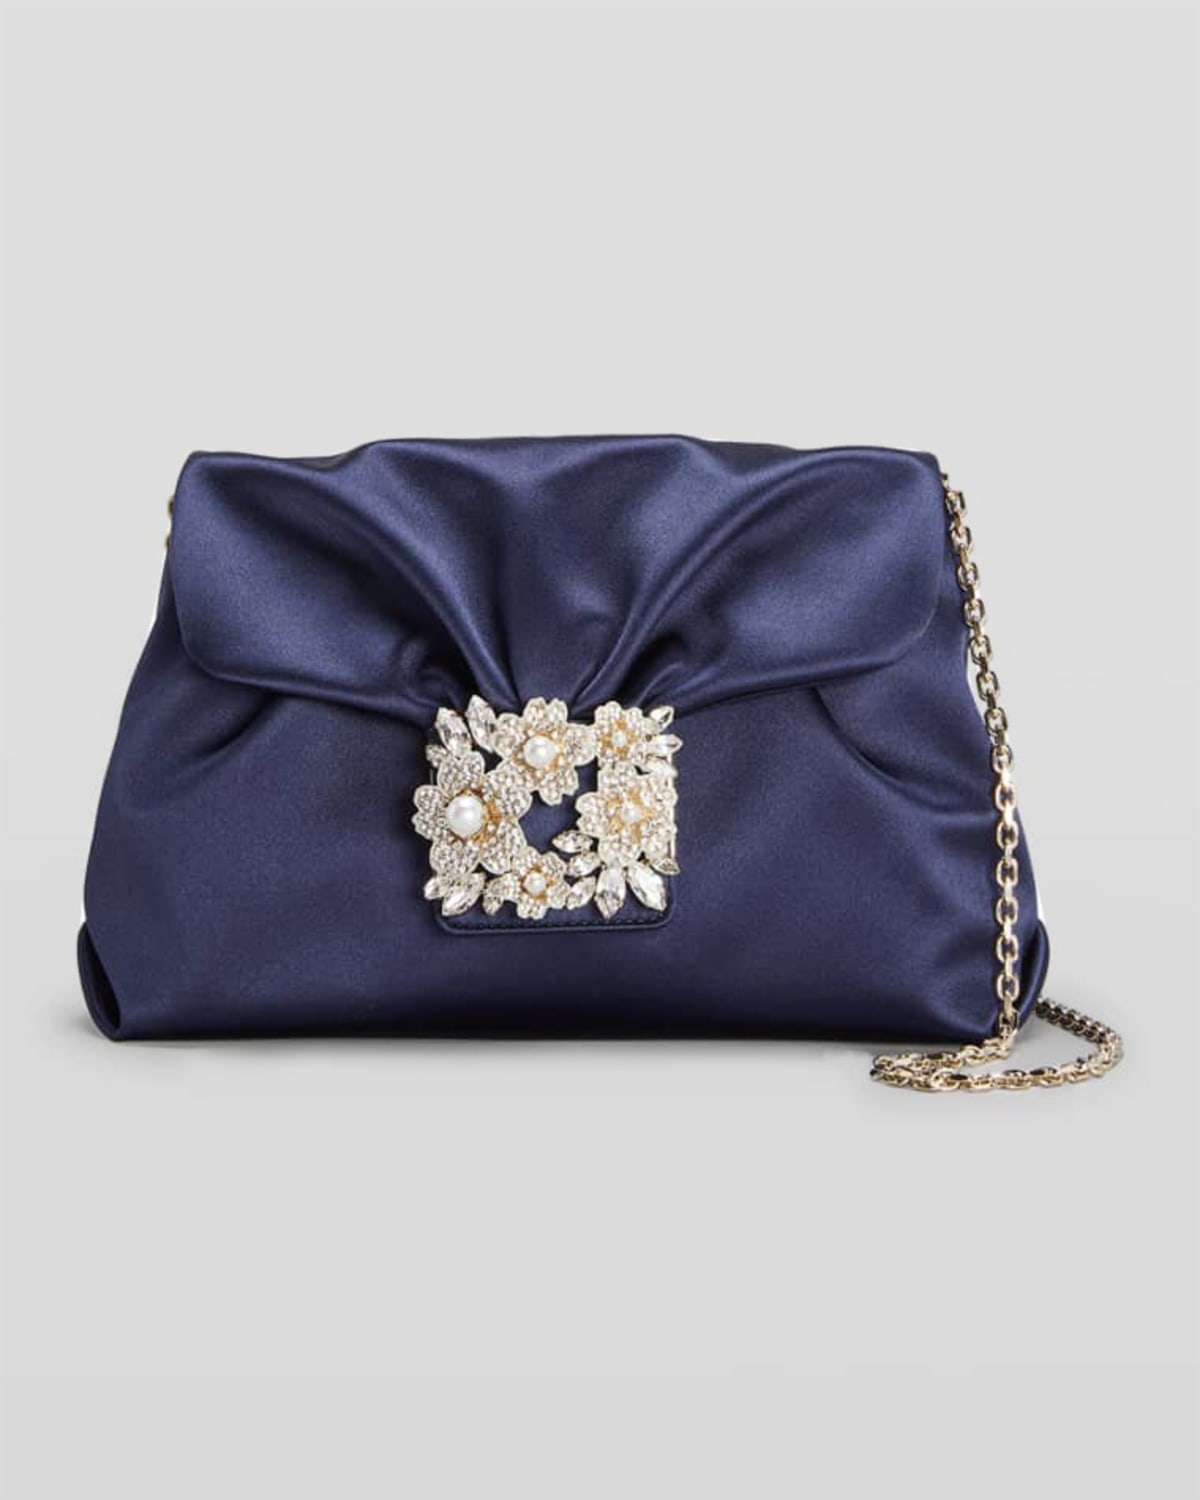 ROGER VIVIER PEARLY STRASS BOUQUET DRAPE CLUTCH BAG